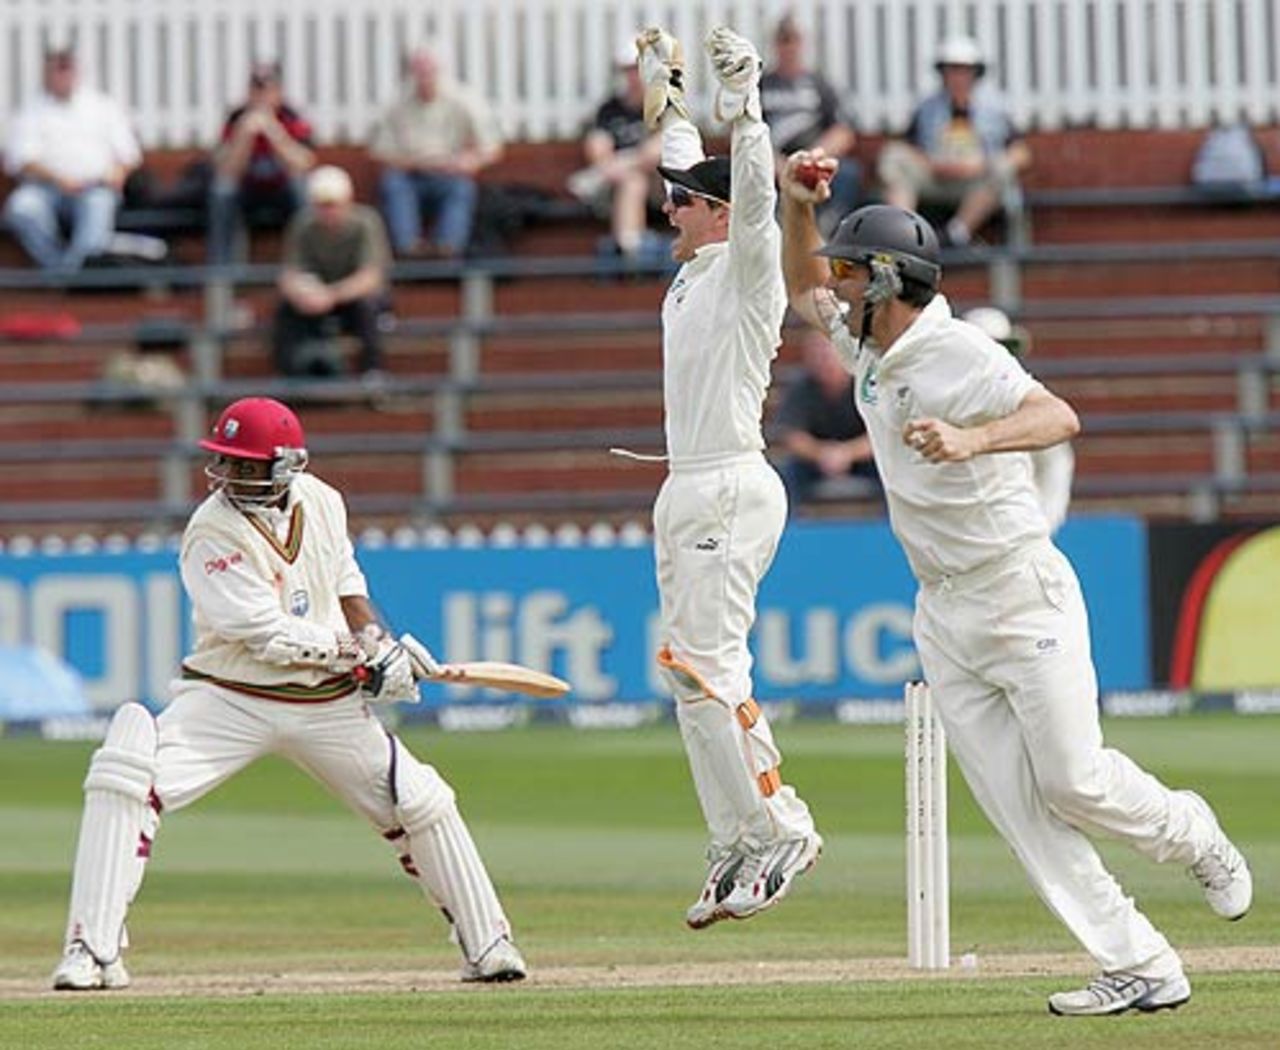 Stephen Fleming catches Shivnarine Chanderpaul, New Zealand v West Indies, 2nd Test, Wellington, 4th day, March 20, 2006